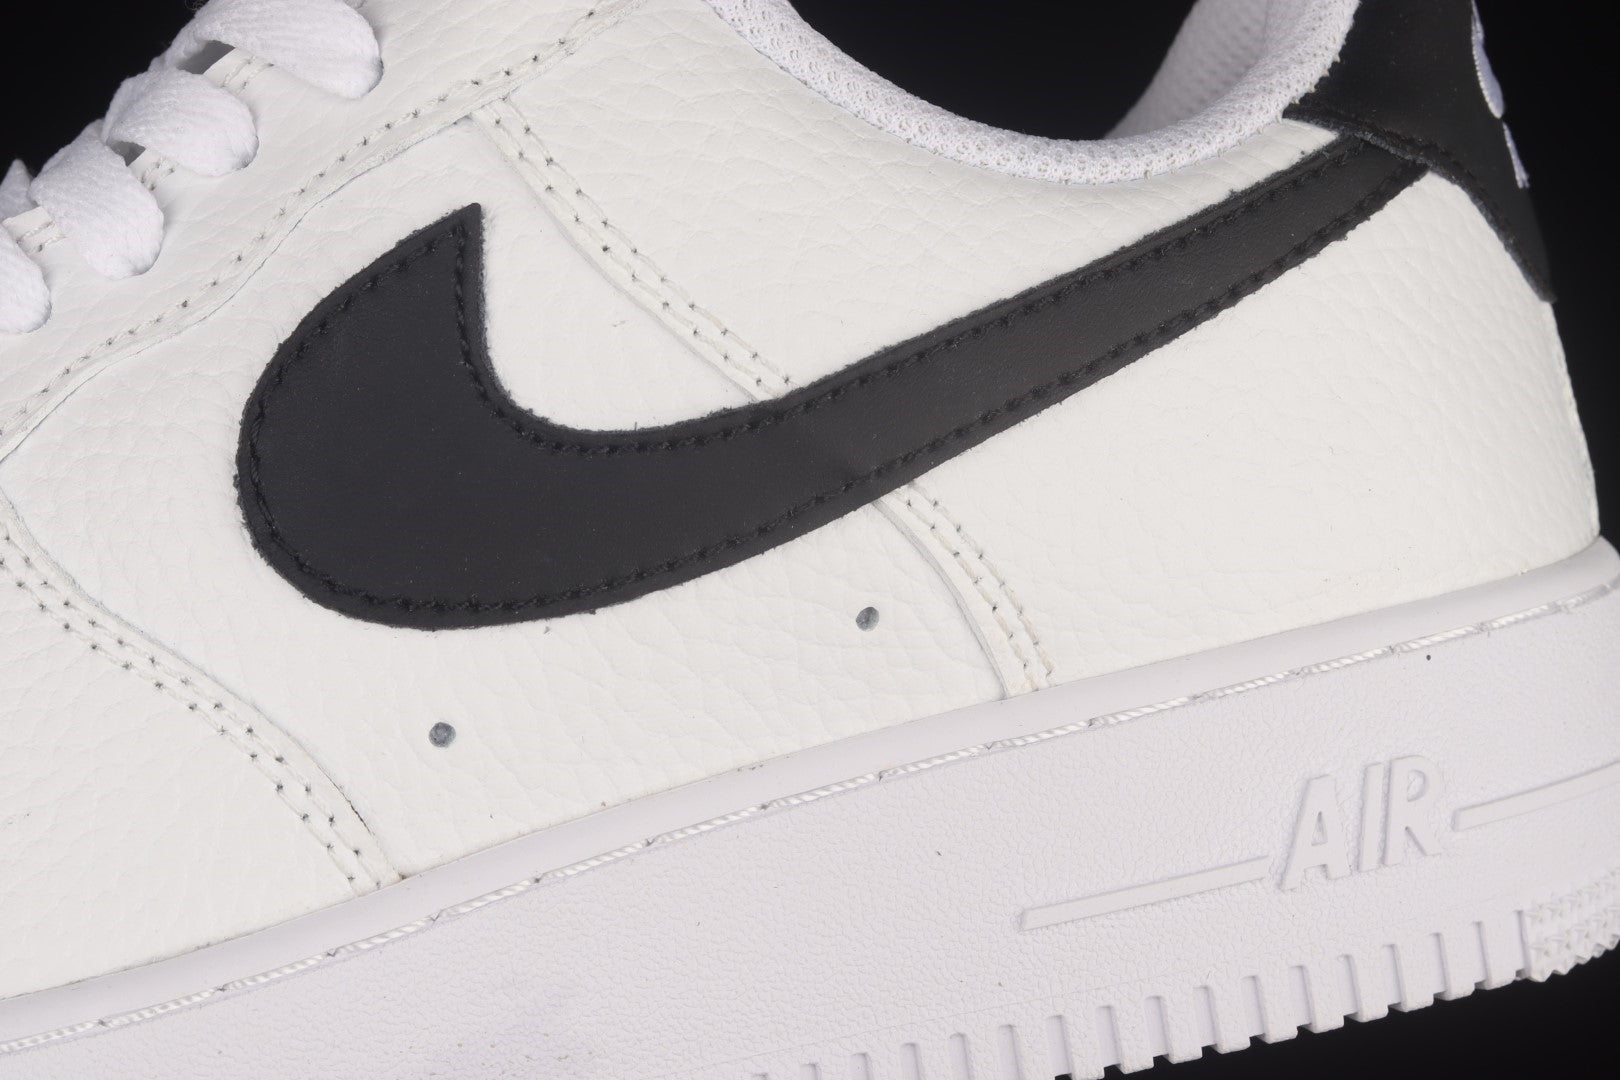 NikeMens Air Force 1 AF1 Low Pebbled Leather - "White Black"